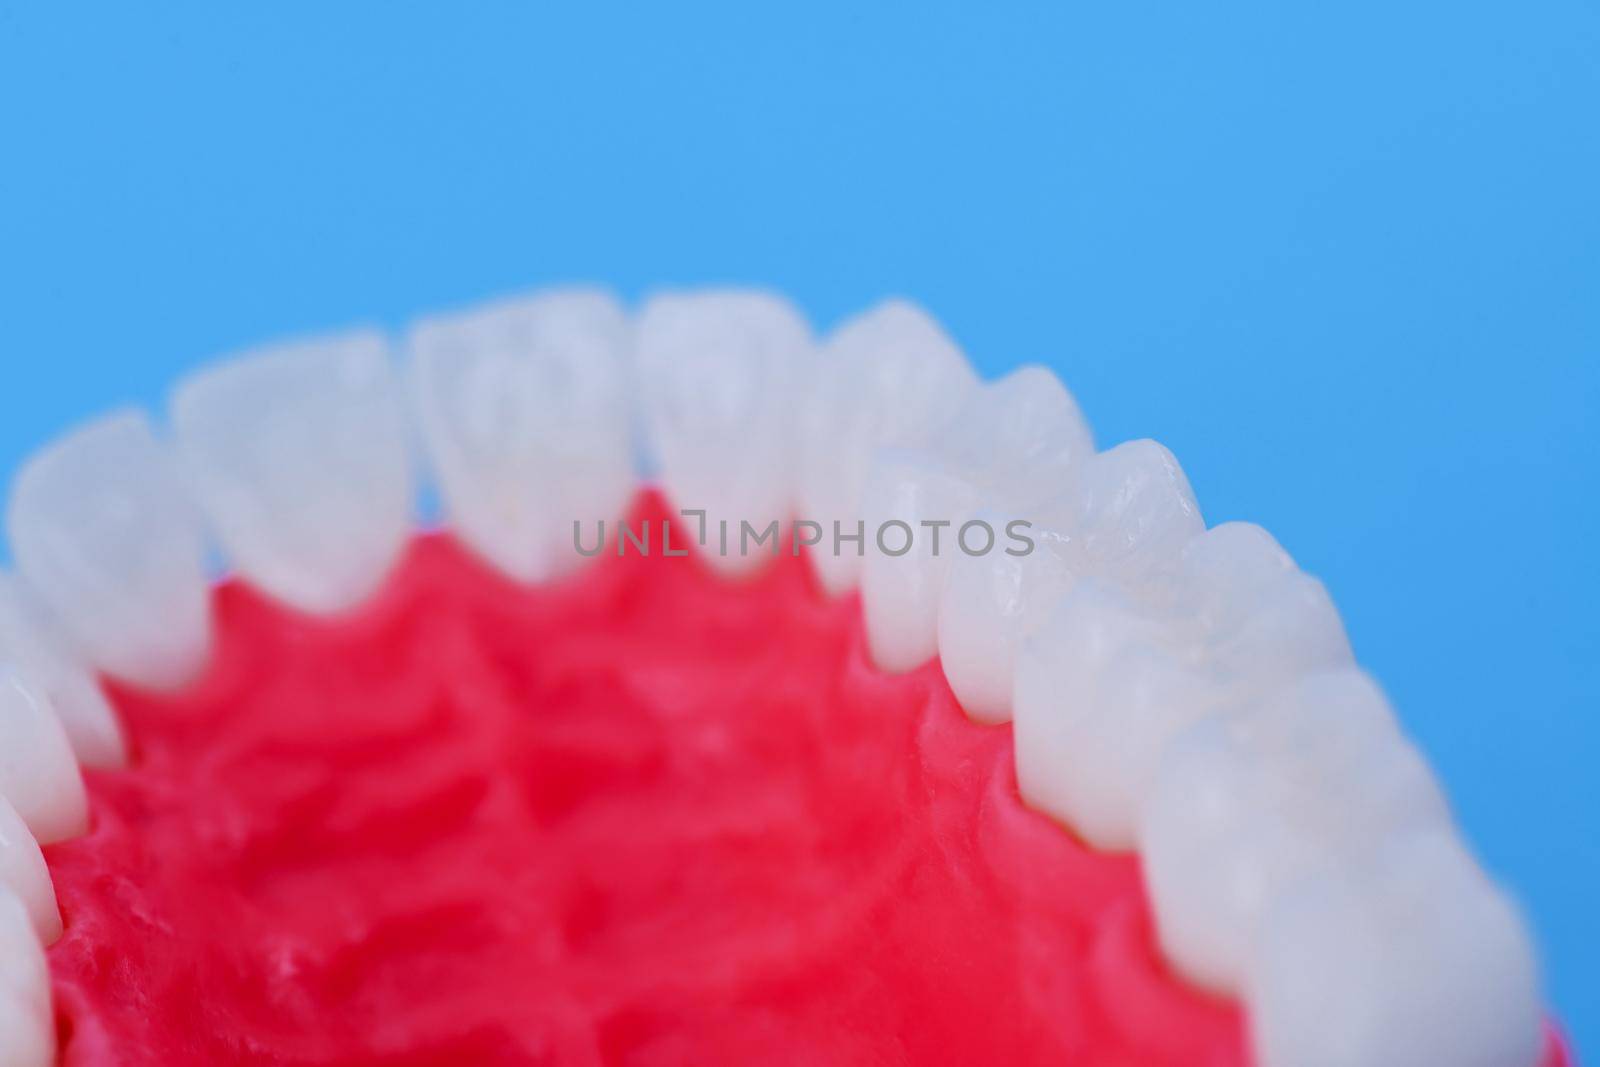 Upper human jaw with teeth and gums anatomy model medical illustration isolated on blue background. Healthy teeth, dental care and orthodontic concept